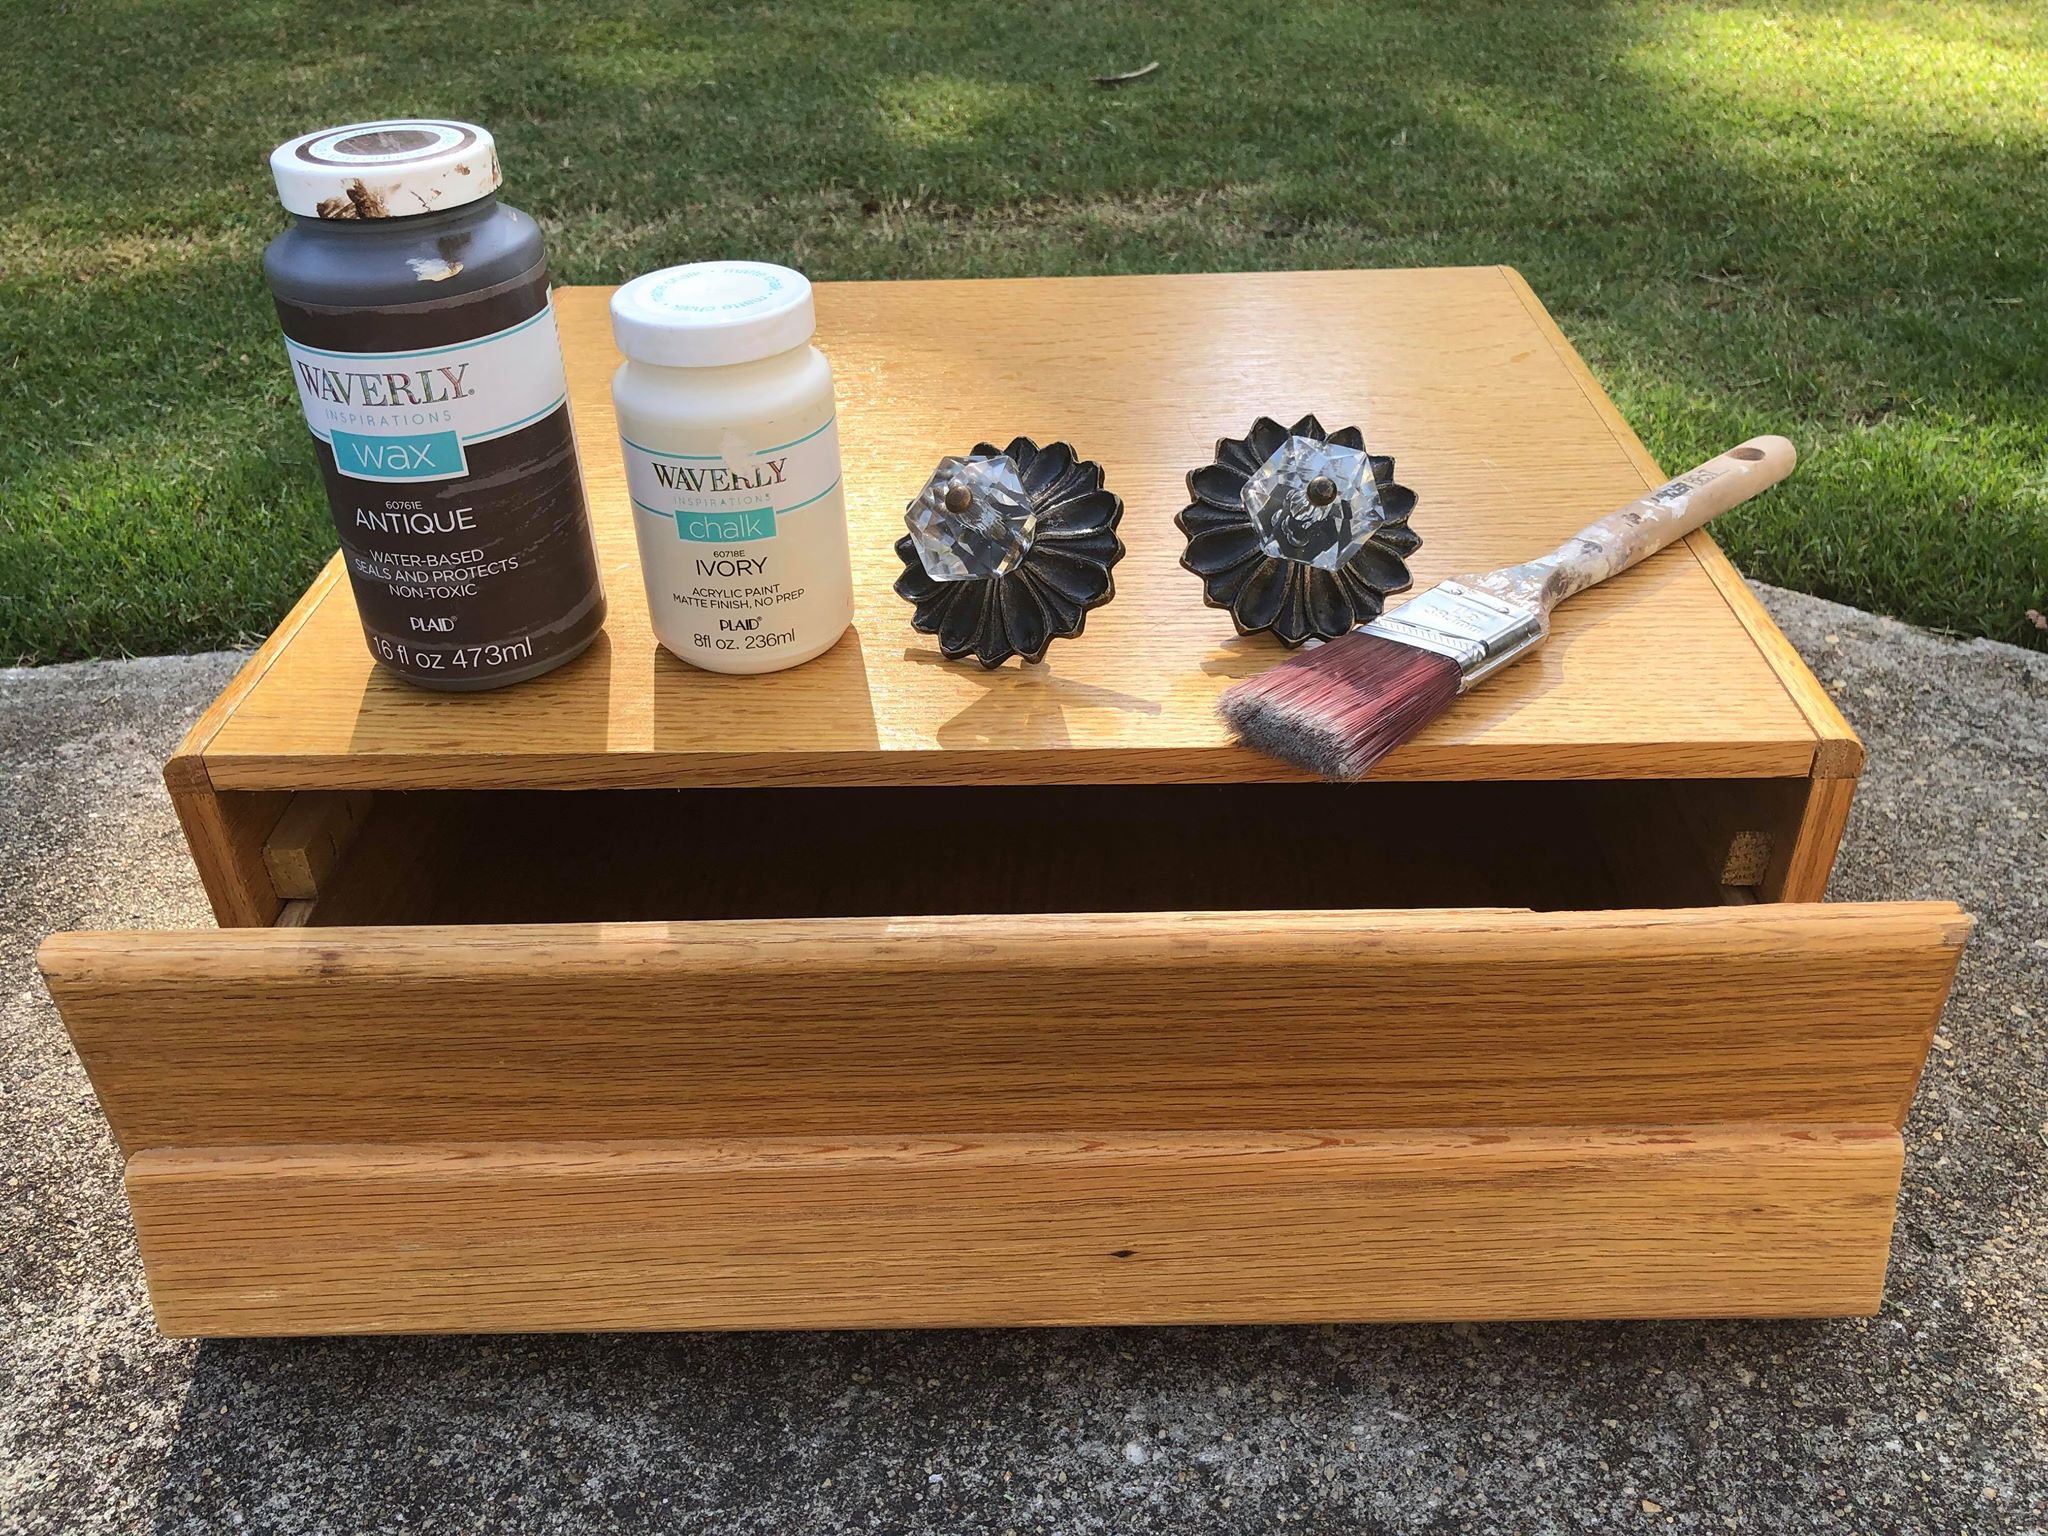 How to Use Waverly Chalk Paint and Wax